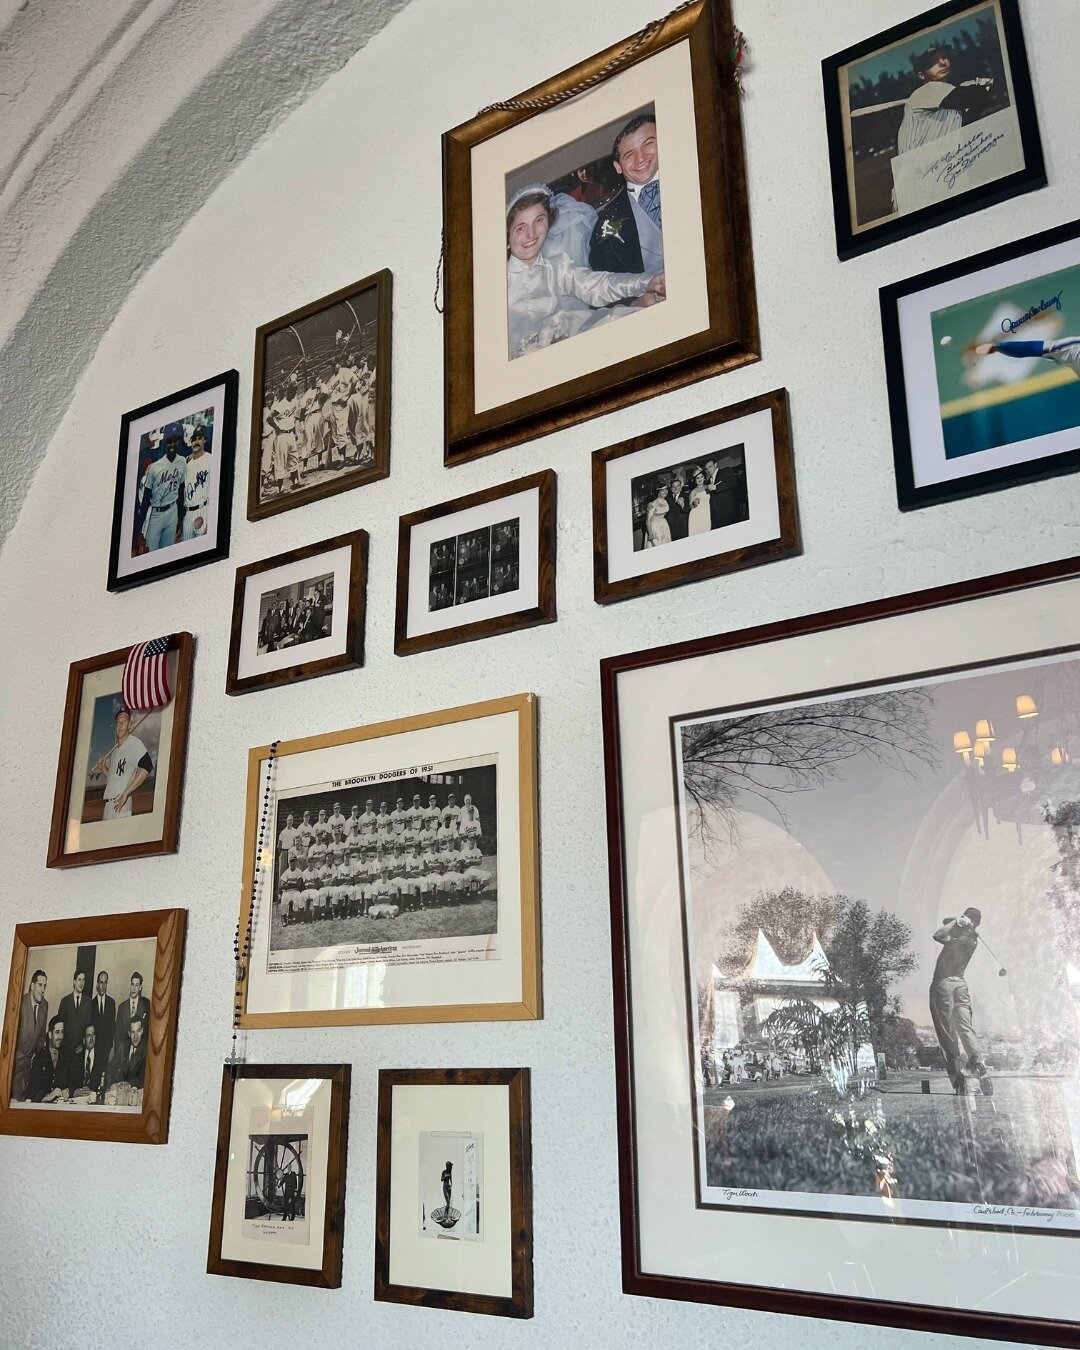 The parlor wall is dedicated to our patriarch Angelo Monte, the keeper of the bar. A collection of his favorite things, his family, the Brooklyn Dodgers, and of course the Mets. His spirit blesses the spirits.⁠
⁠
#montauk #bar #montesathemanor